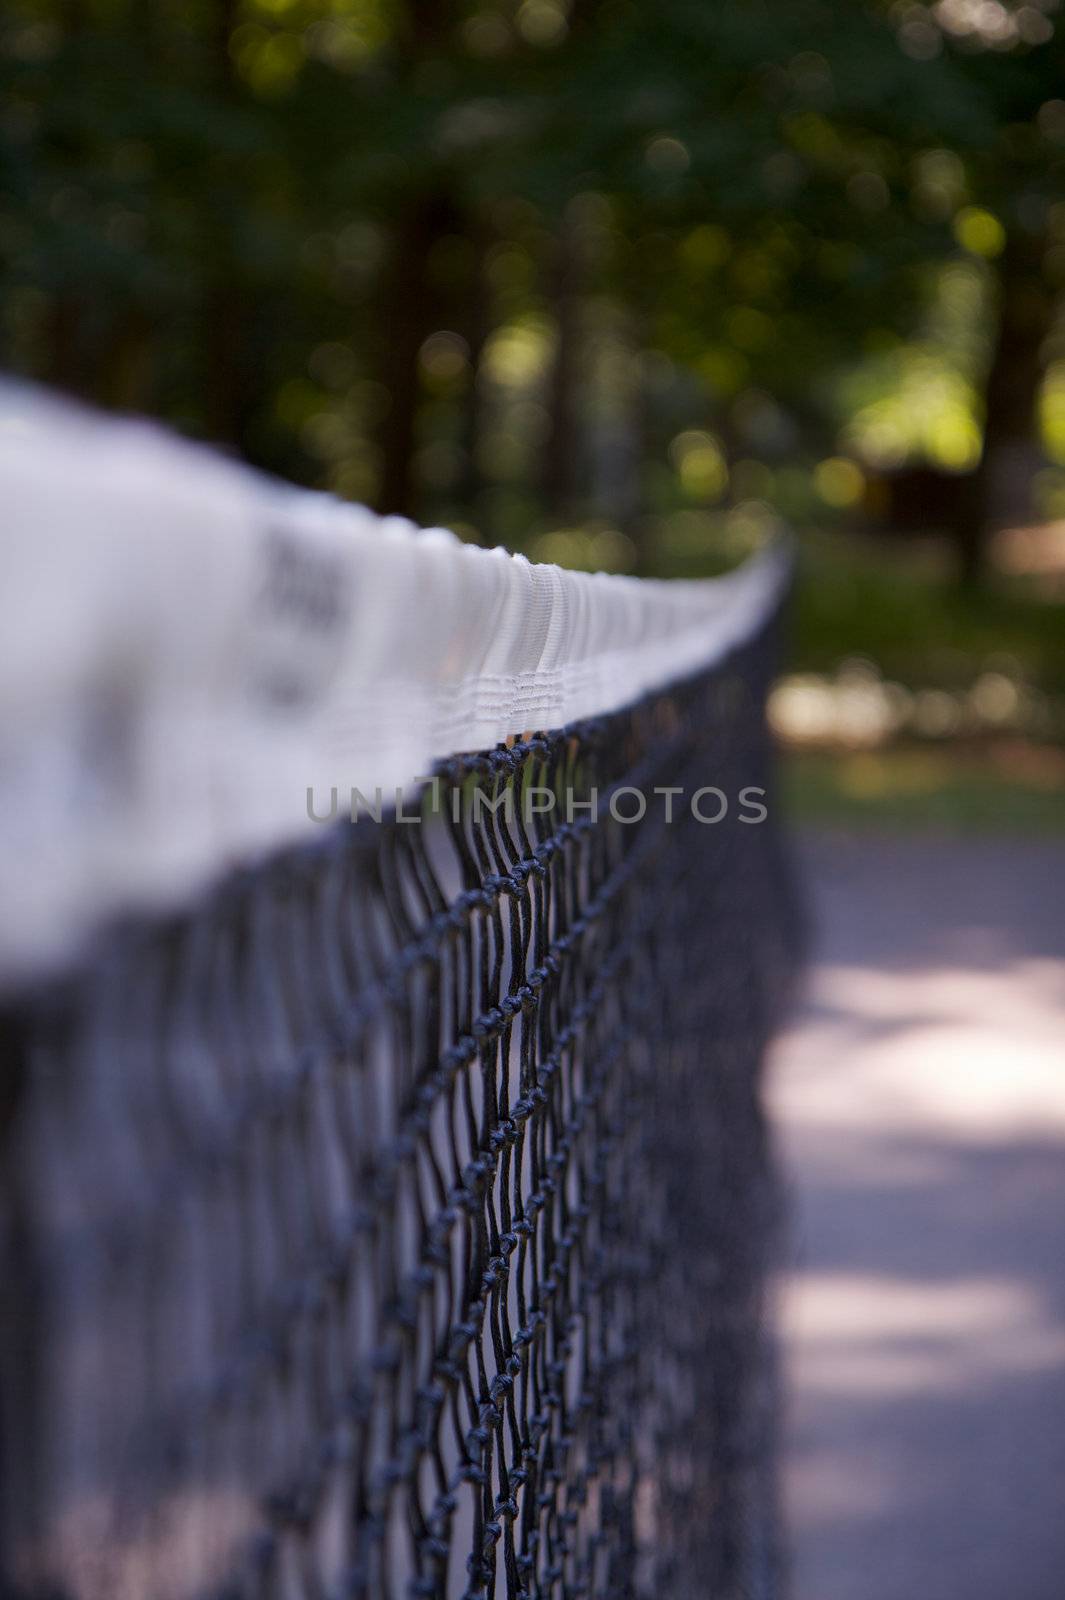 Top of tennis net taken with narrow depth of field with trees in background